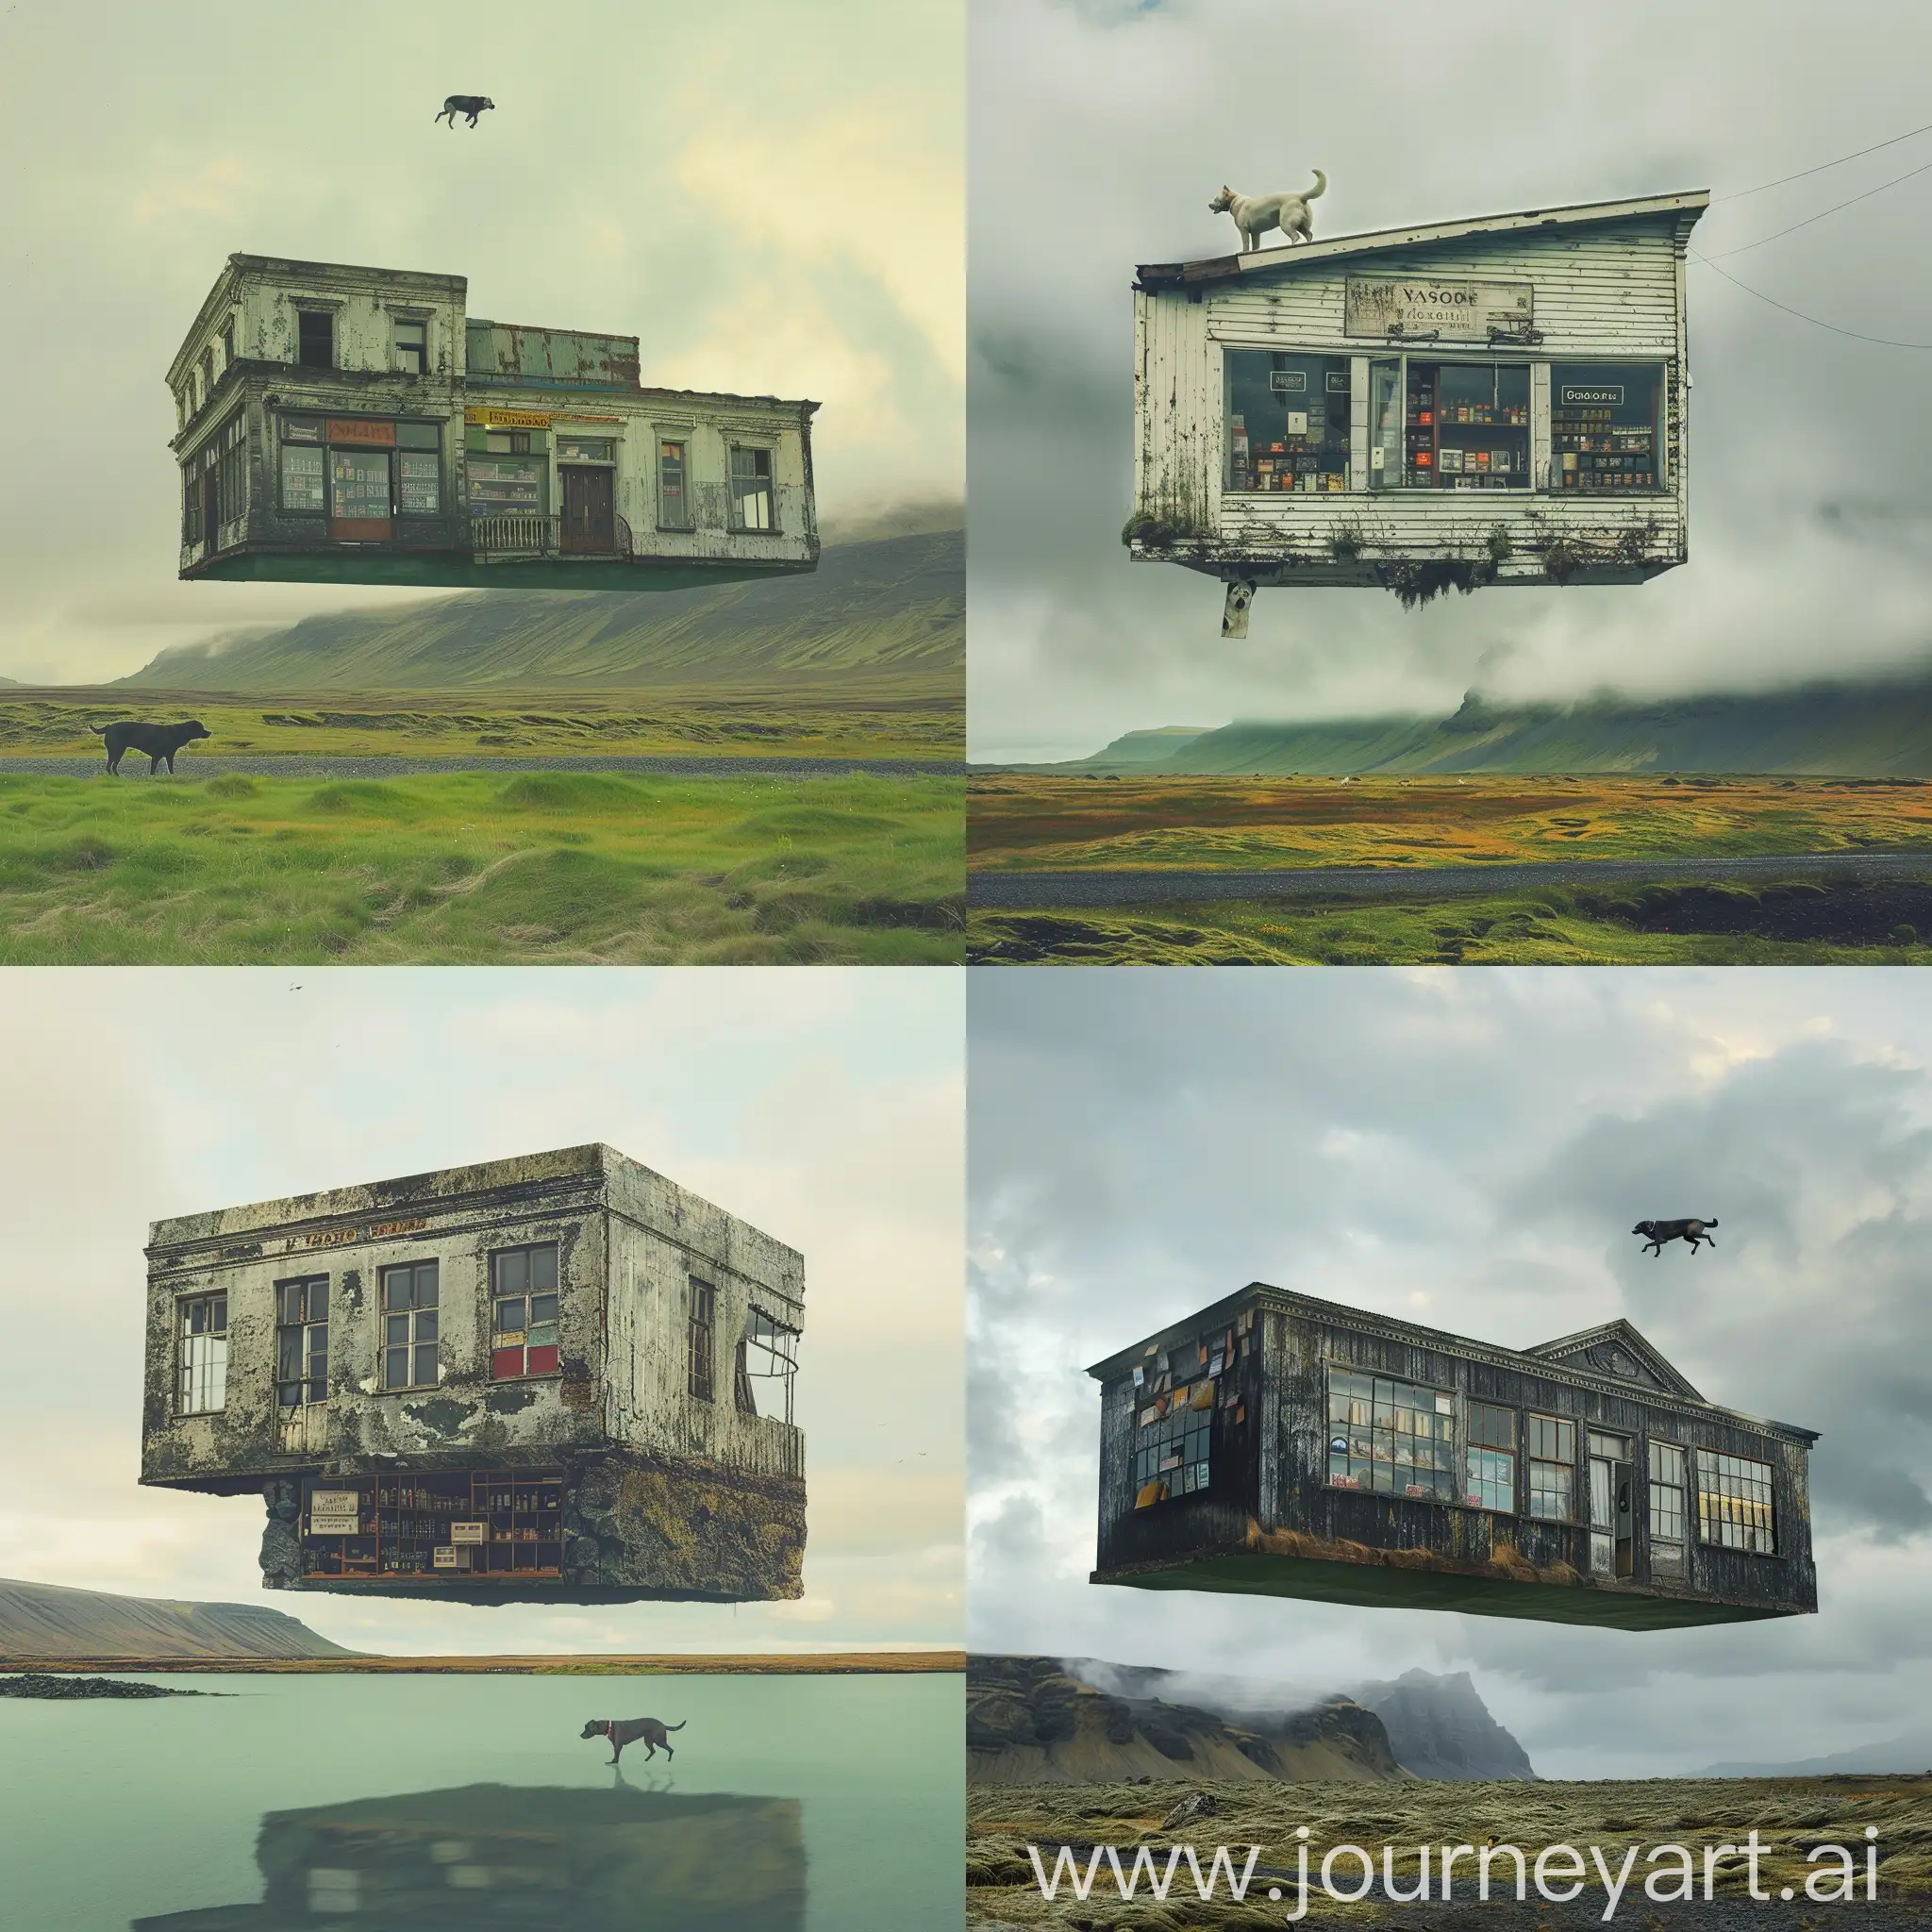 Enigmatic-Floating-Shop-and-Companions-in-Vibrant-Icelandic-Landscape